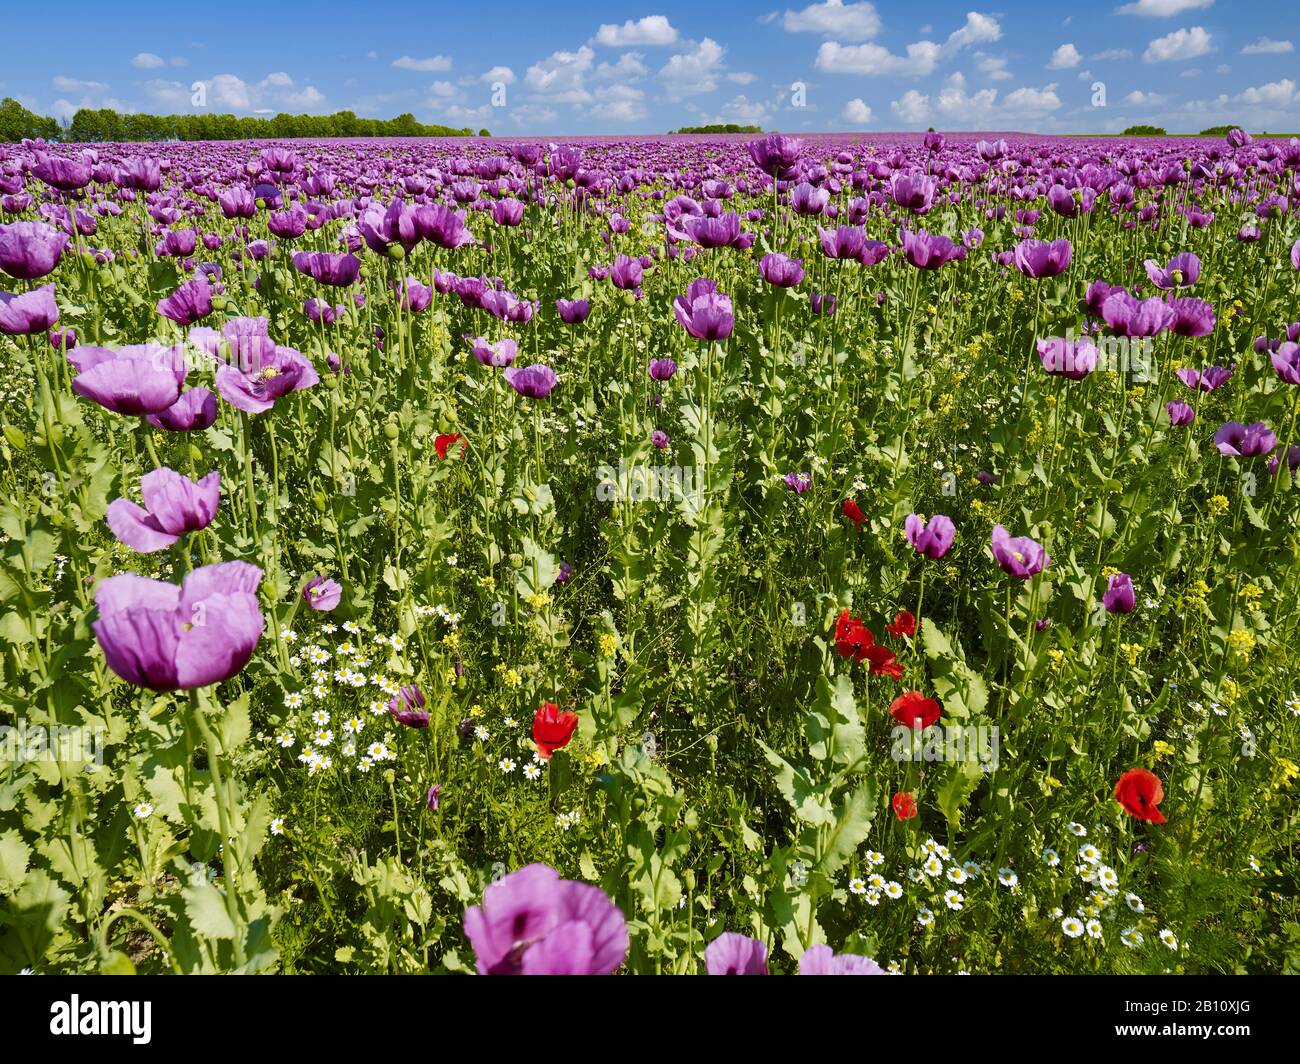 Flowering opium poppy (Papaver somniferum) on a field in Thuringia, Germany Stock Photo